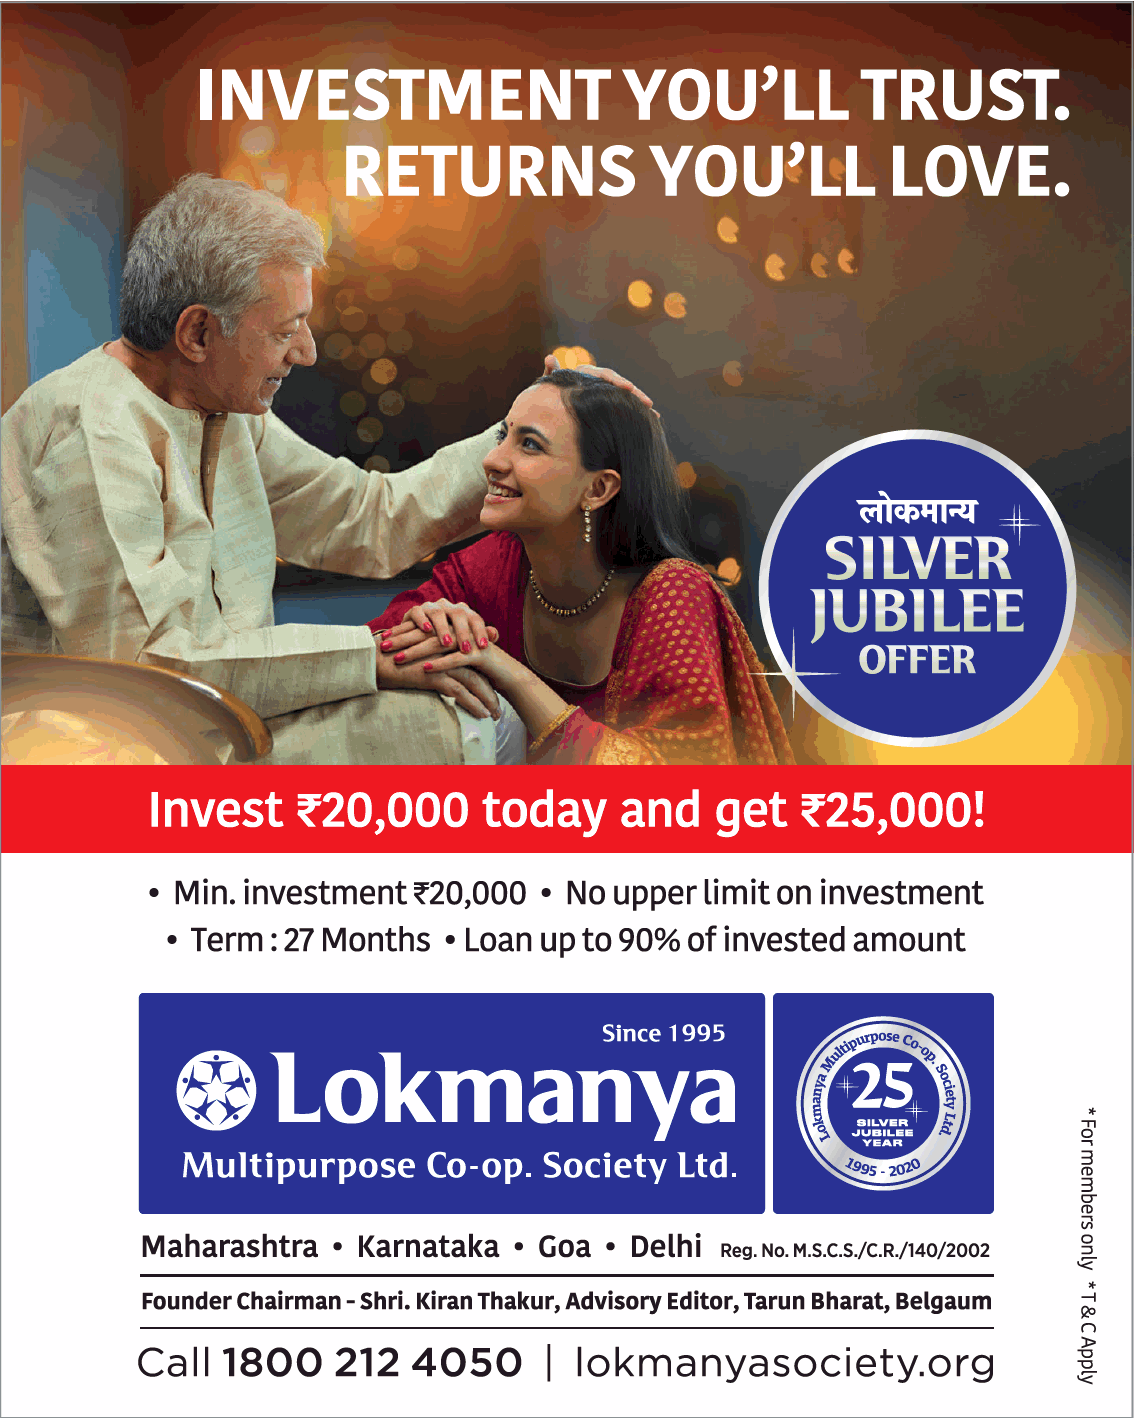 lokmanya-co-op-society-silver-jubilee-offer-invest-20000-today-and-get-25000-ad-toi-pune-9-10-2020